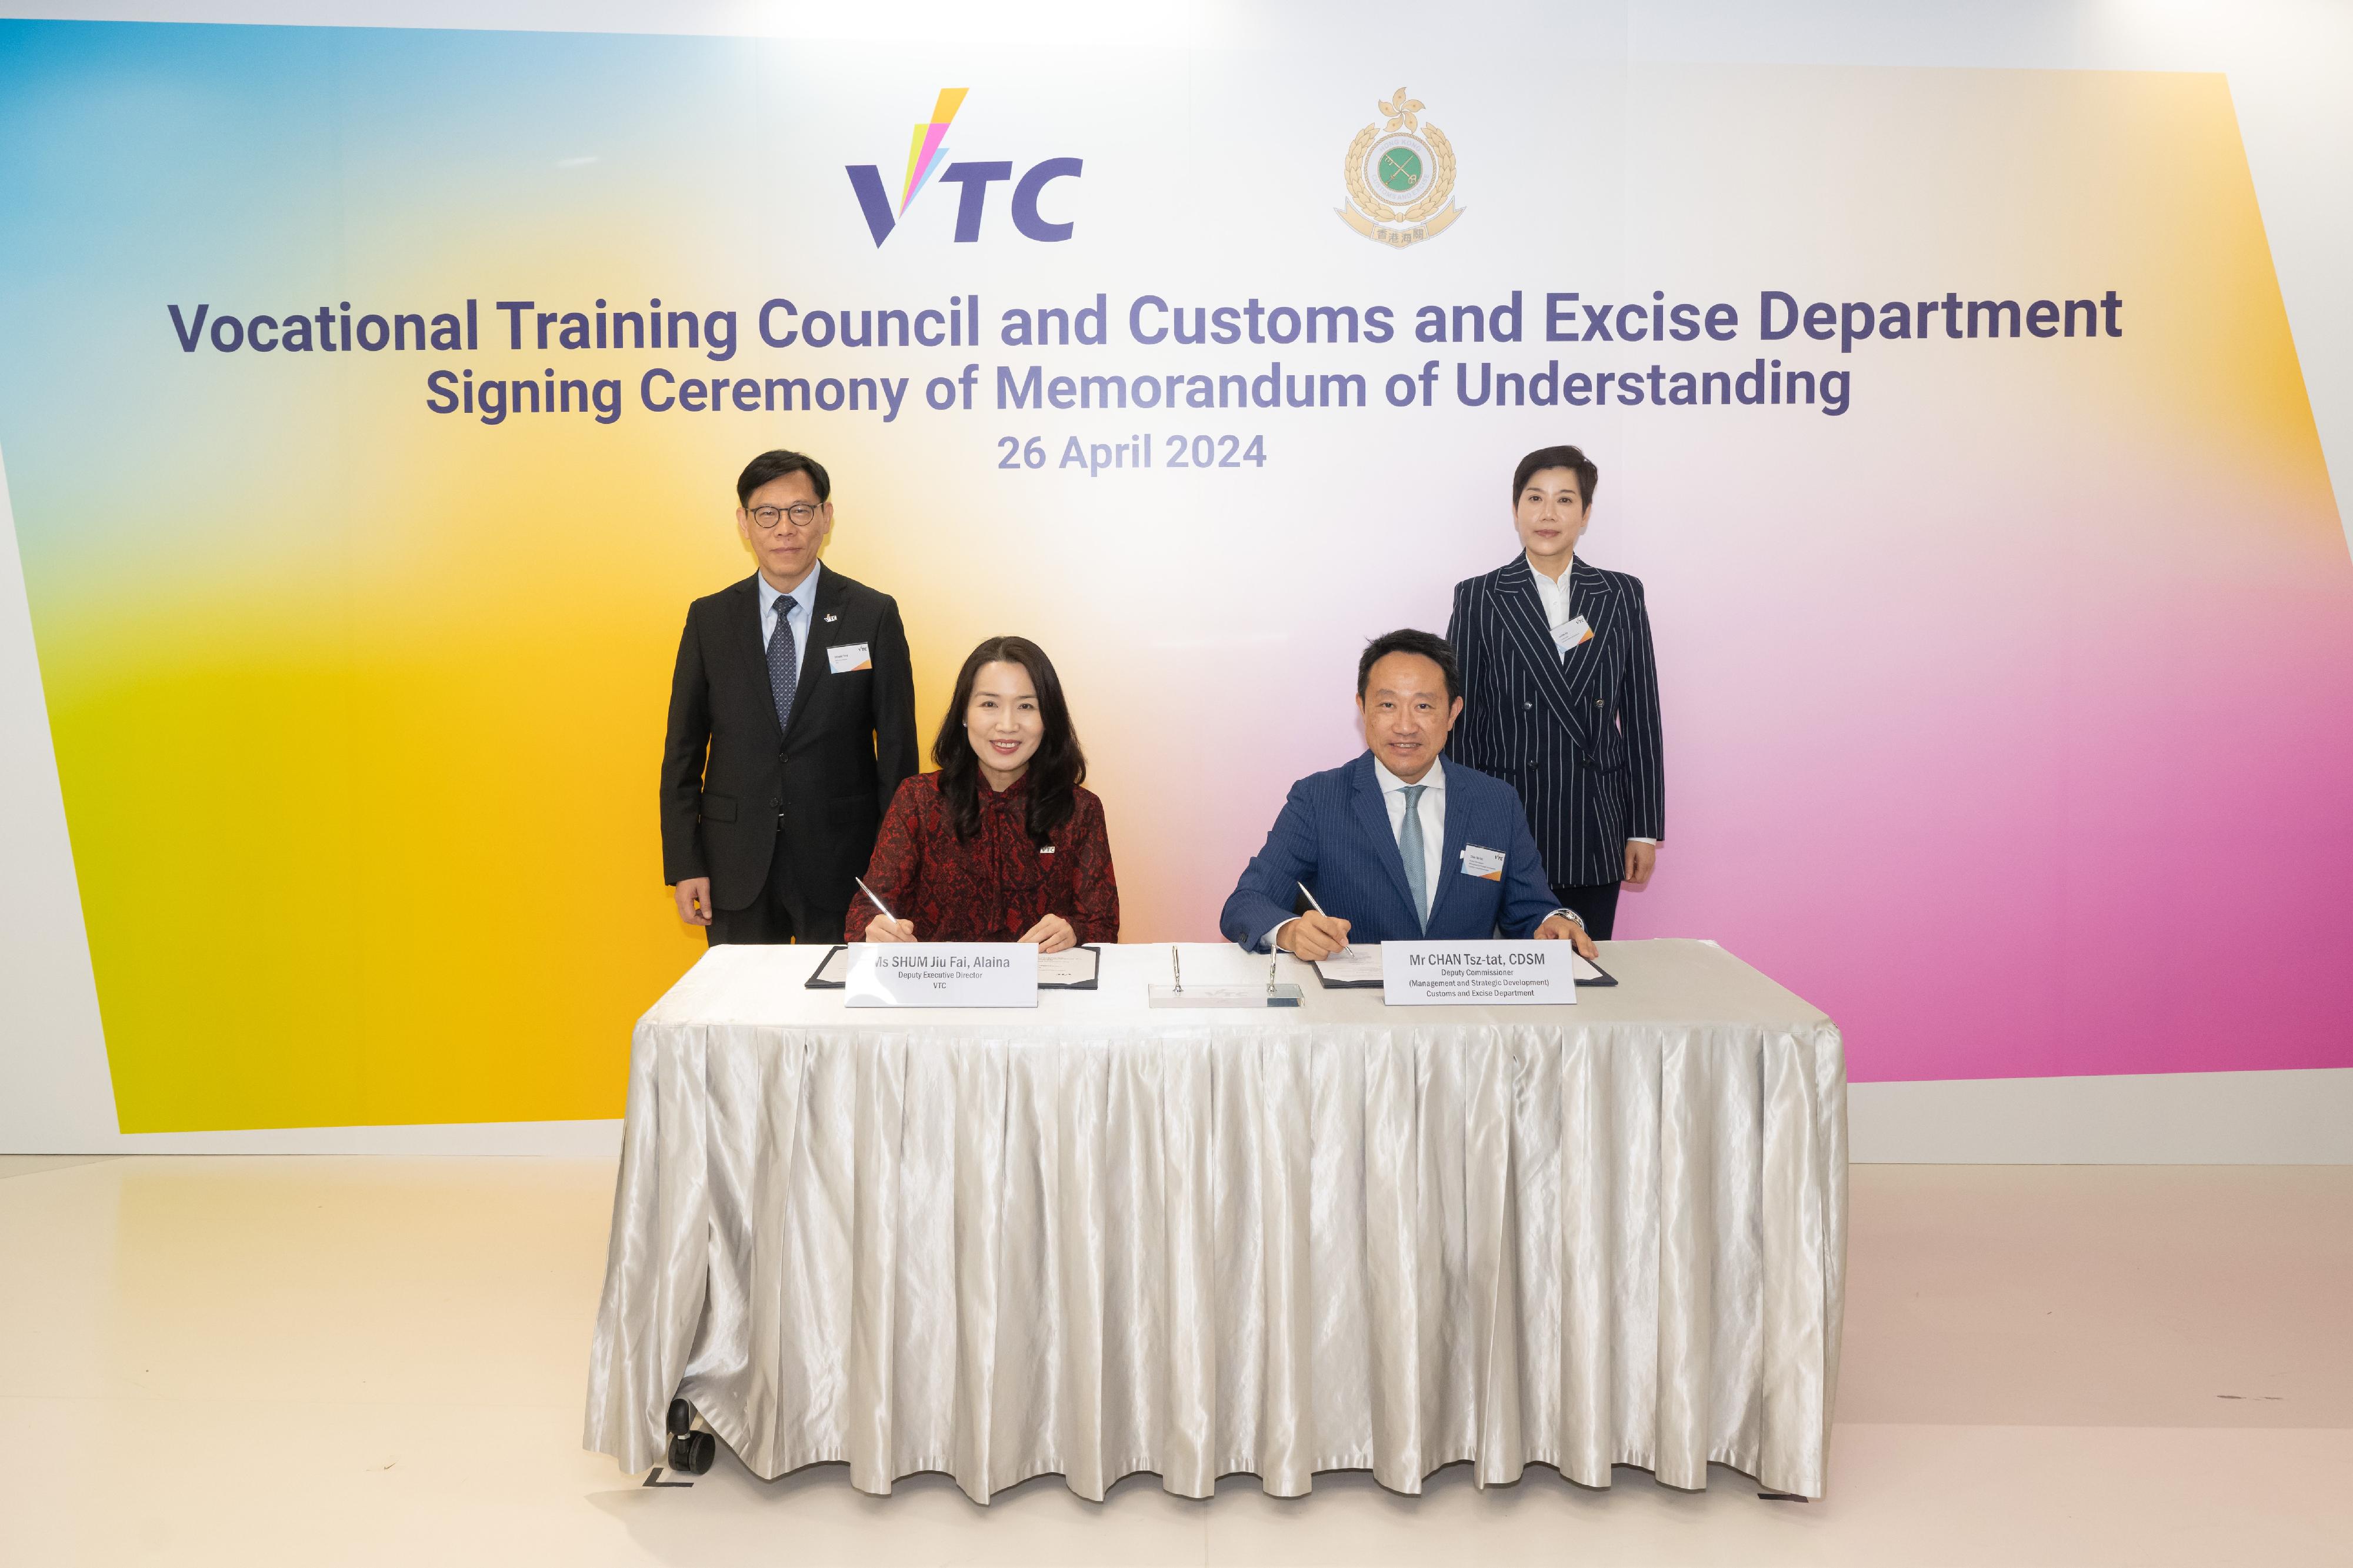 The Commissioner of Customs and Excise, Ms Louise Ho (back row, right), and the Executive Director of the Vocational Training Council (VTC), Mr Donald Tong (back row, left), on April 26 witnessed the Deputy Commissioner (Management and Strategic Development) of Customs, Mr Chan Tsz-tat (front row, right), and Deputy Executive Director of the VTC Ms Alaina Shum (front row, left) signing a Memorandum of Understanding for enhancing Customs officers' training in professional areas and promoting Customs work and "Customs YES" to VTC students.